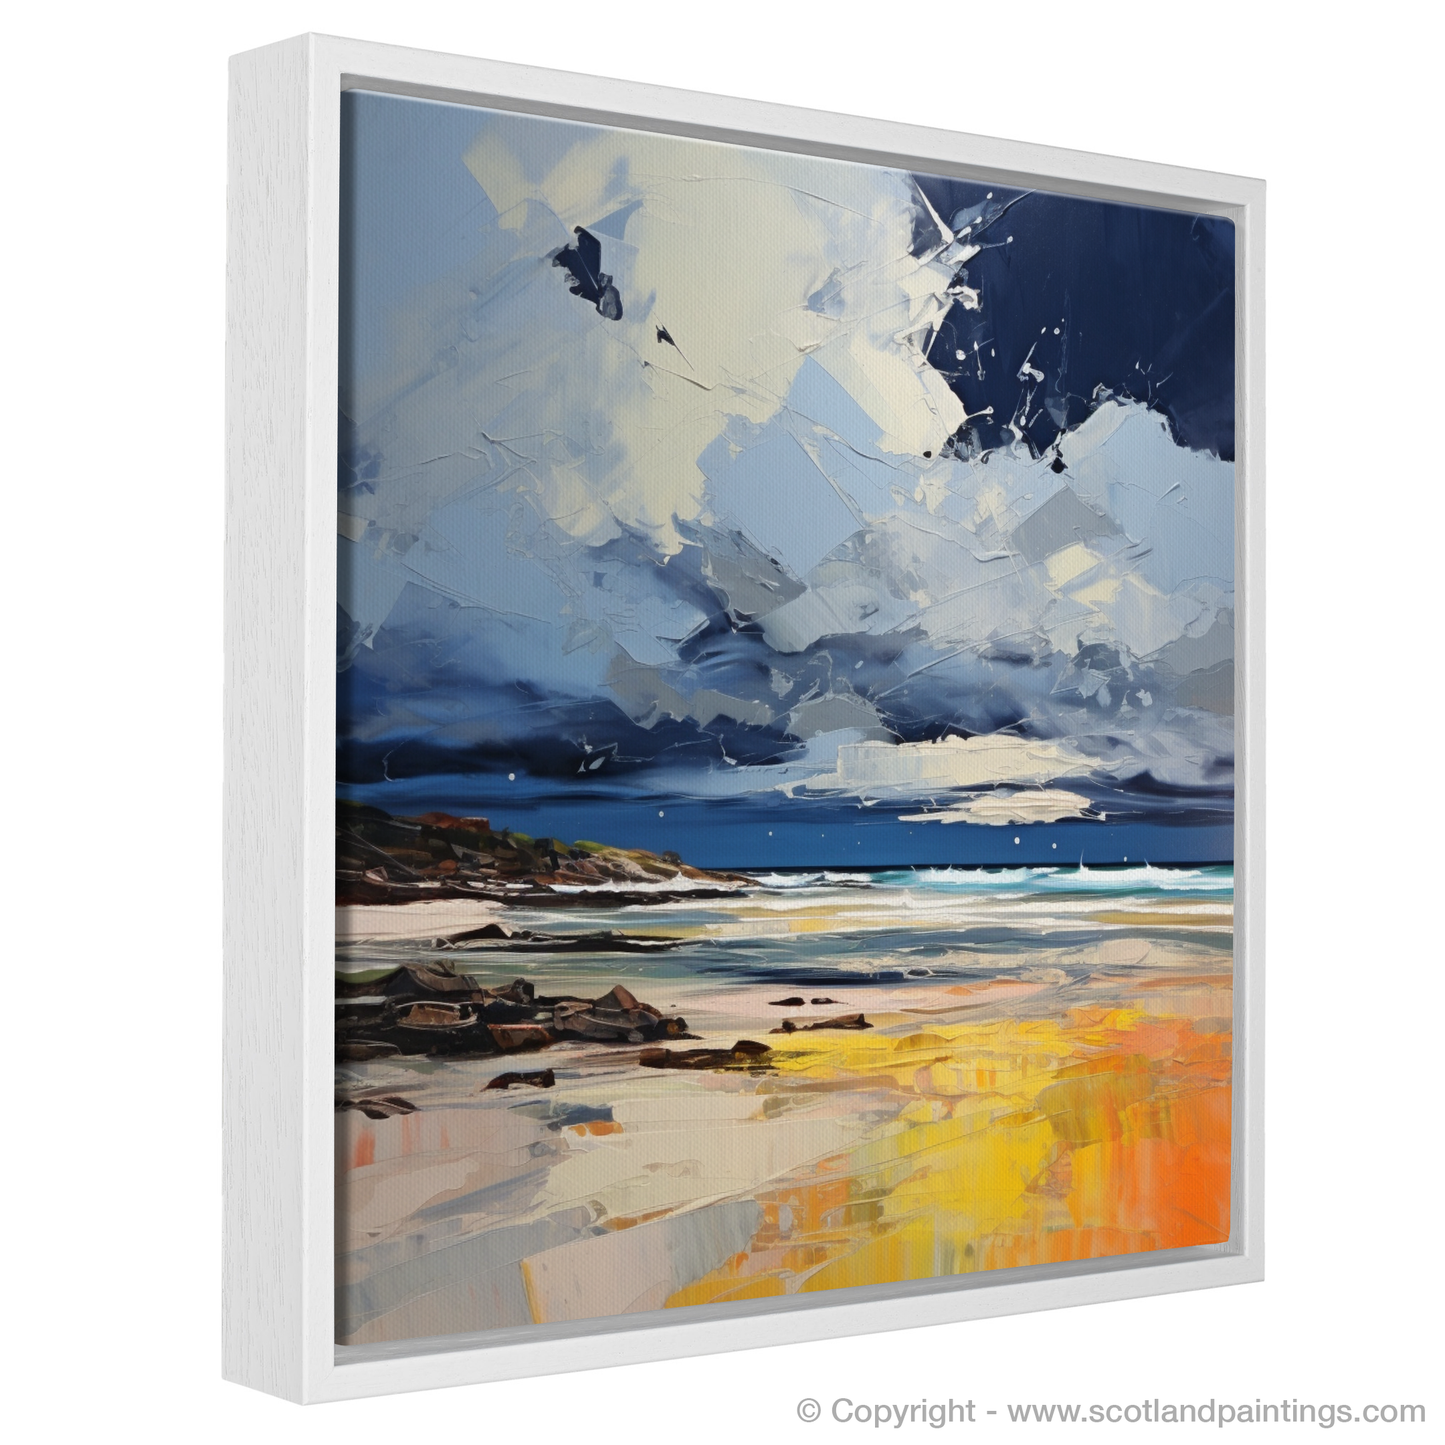 Painting and Art Print of West Sands with a stormy sky entitled "Tempest Over West Sands: An Expressionist Ode to Scotland's Coastal Majesty".